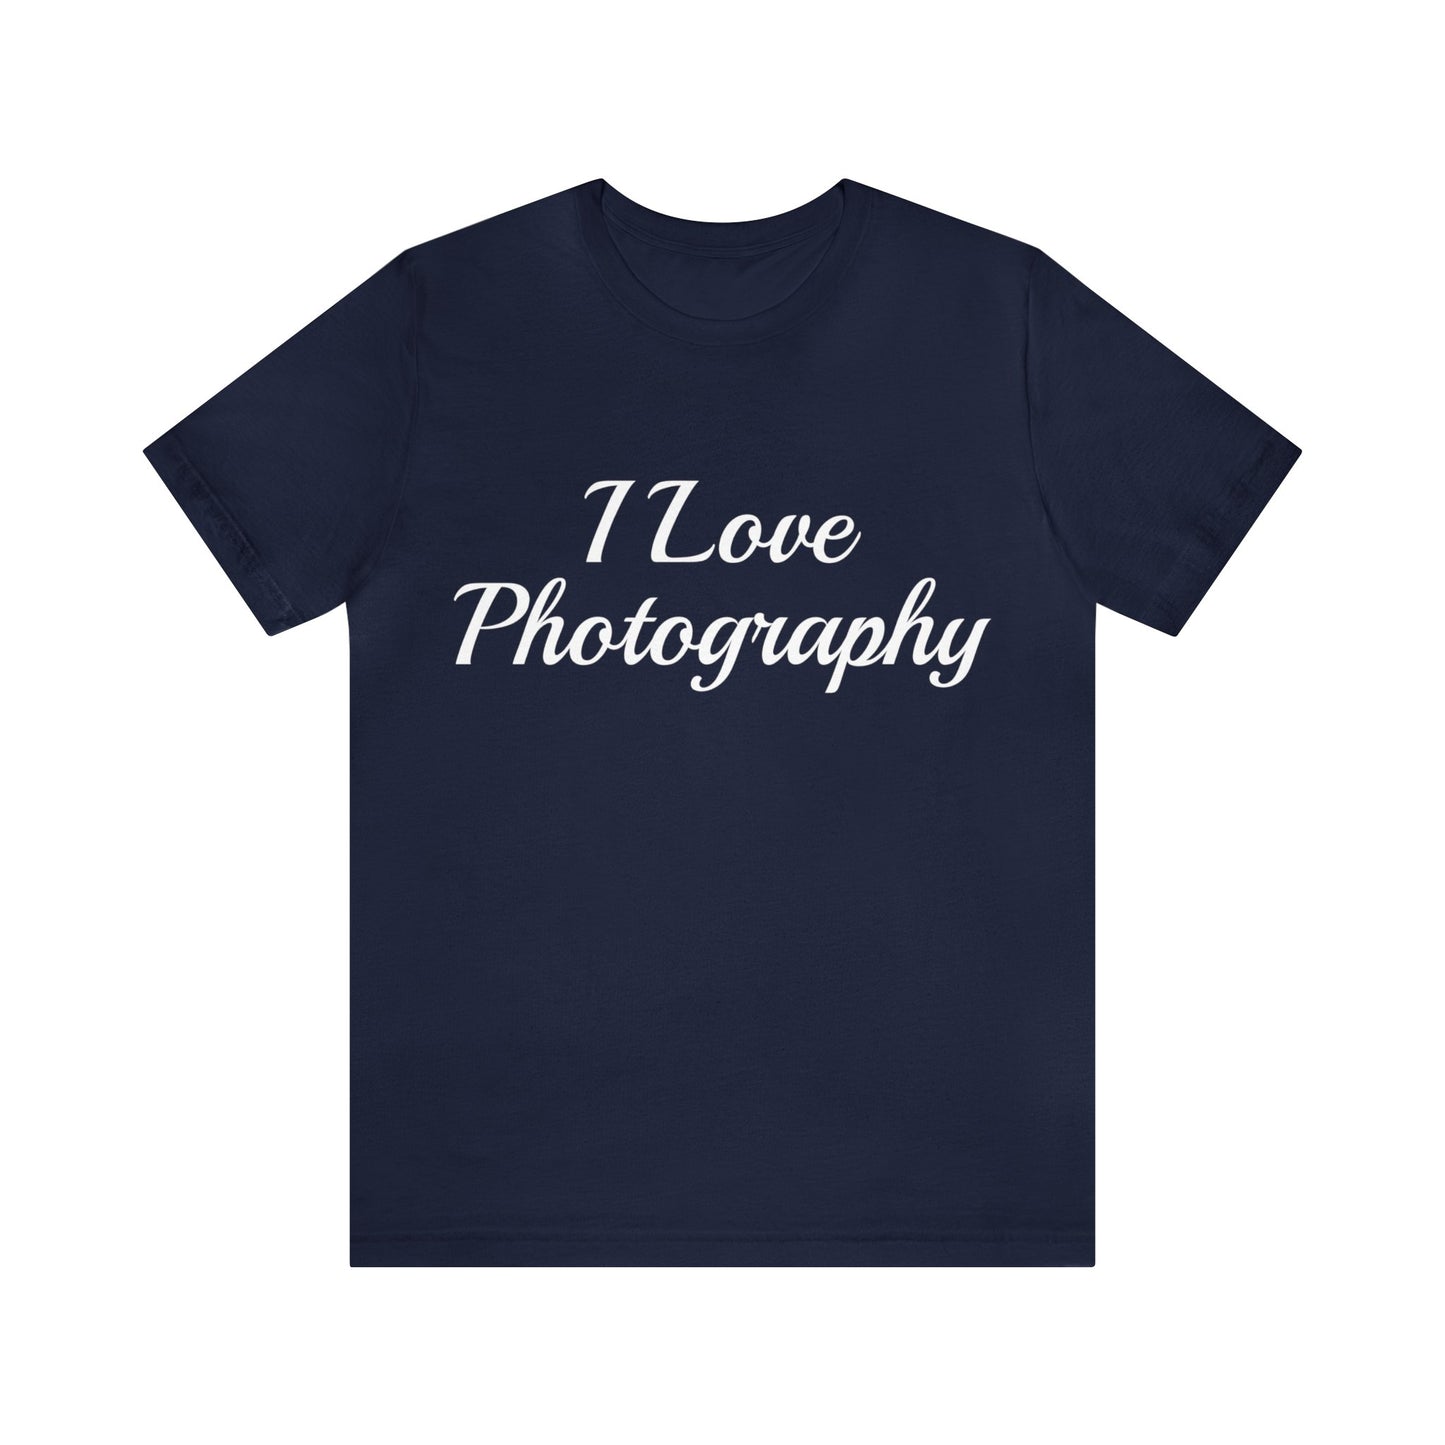 Navy T-Shirt Tshirt Gift for Friends and Family Short Sleeve T Shirt Petrova Designs